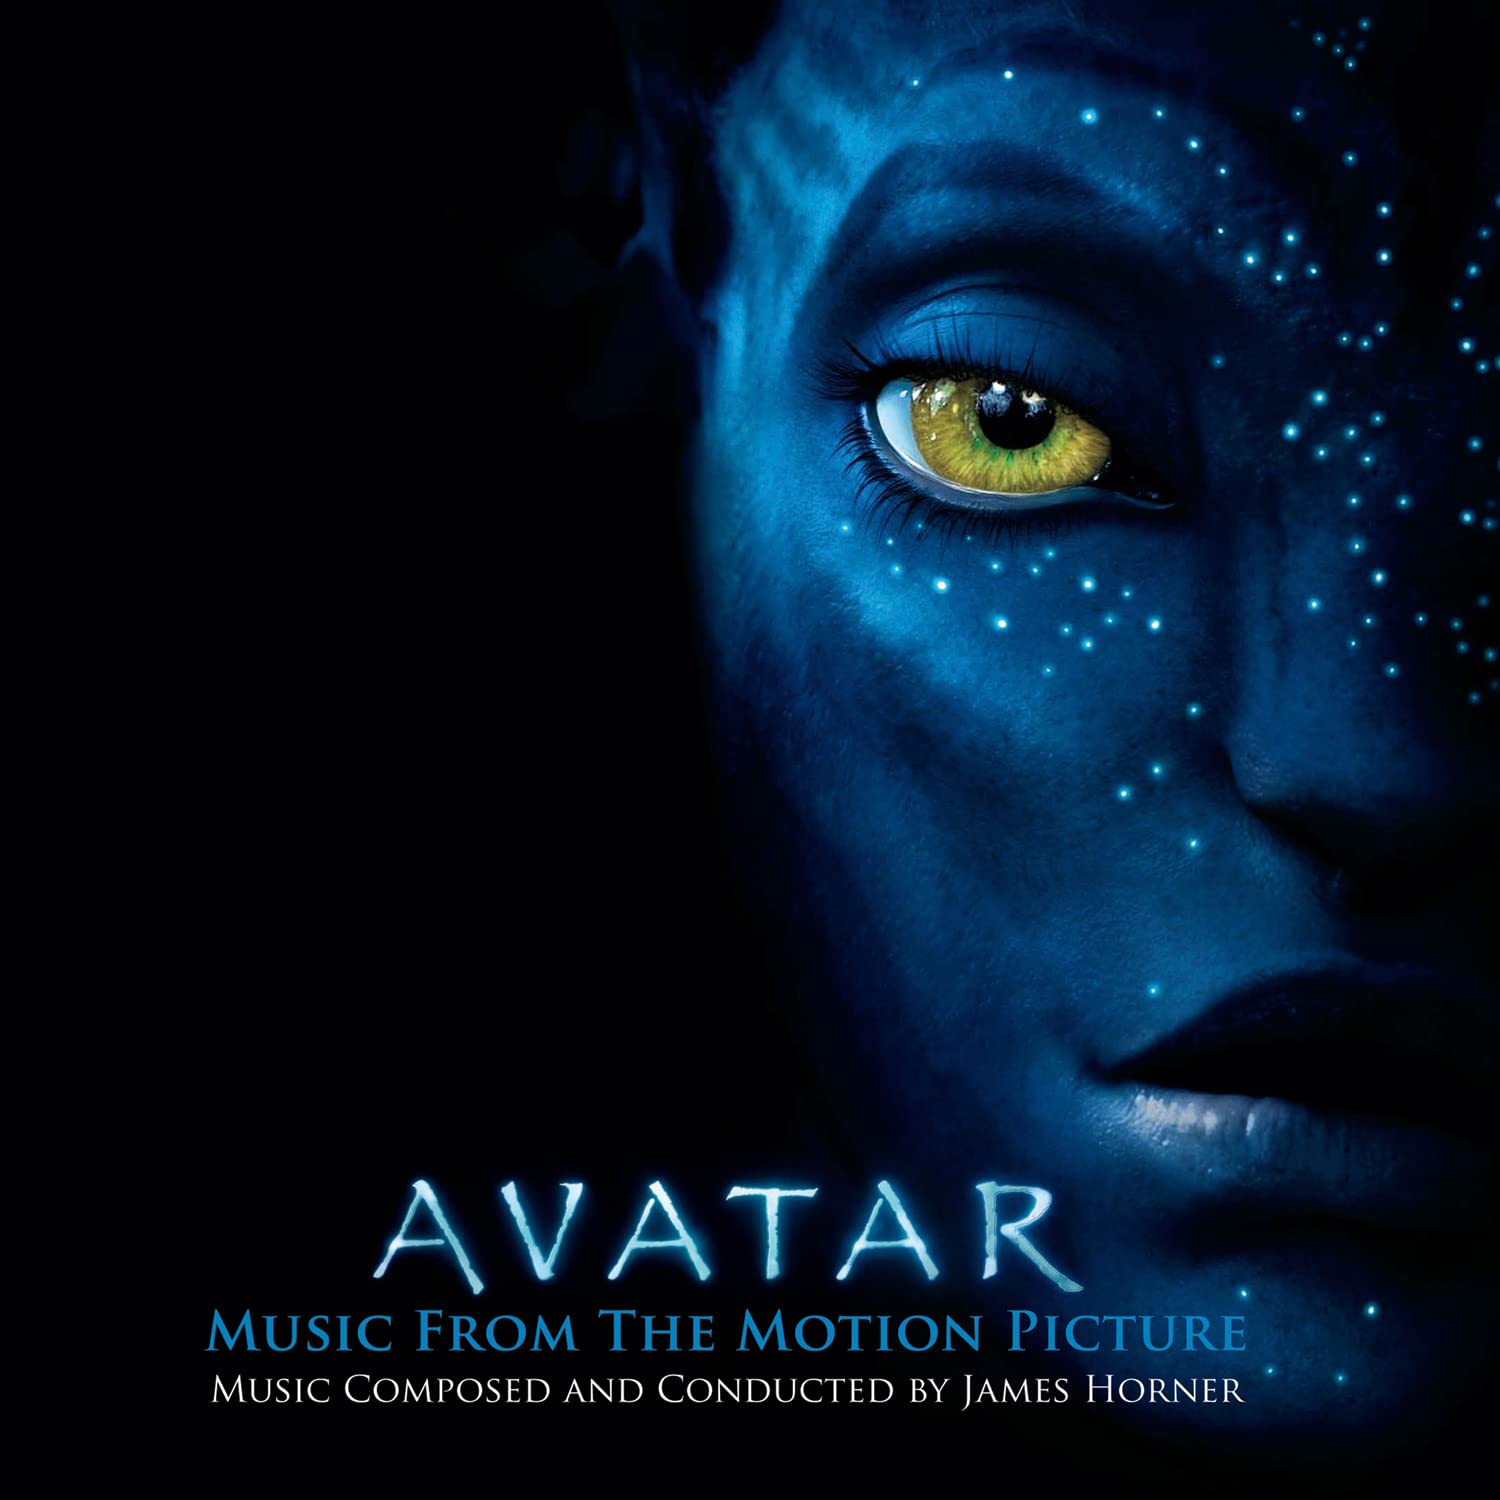 Avatar (Music From The Motion Picture Soundtrack) (Vinyl LP)